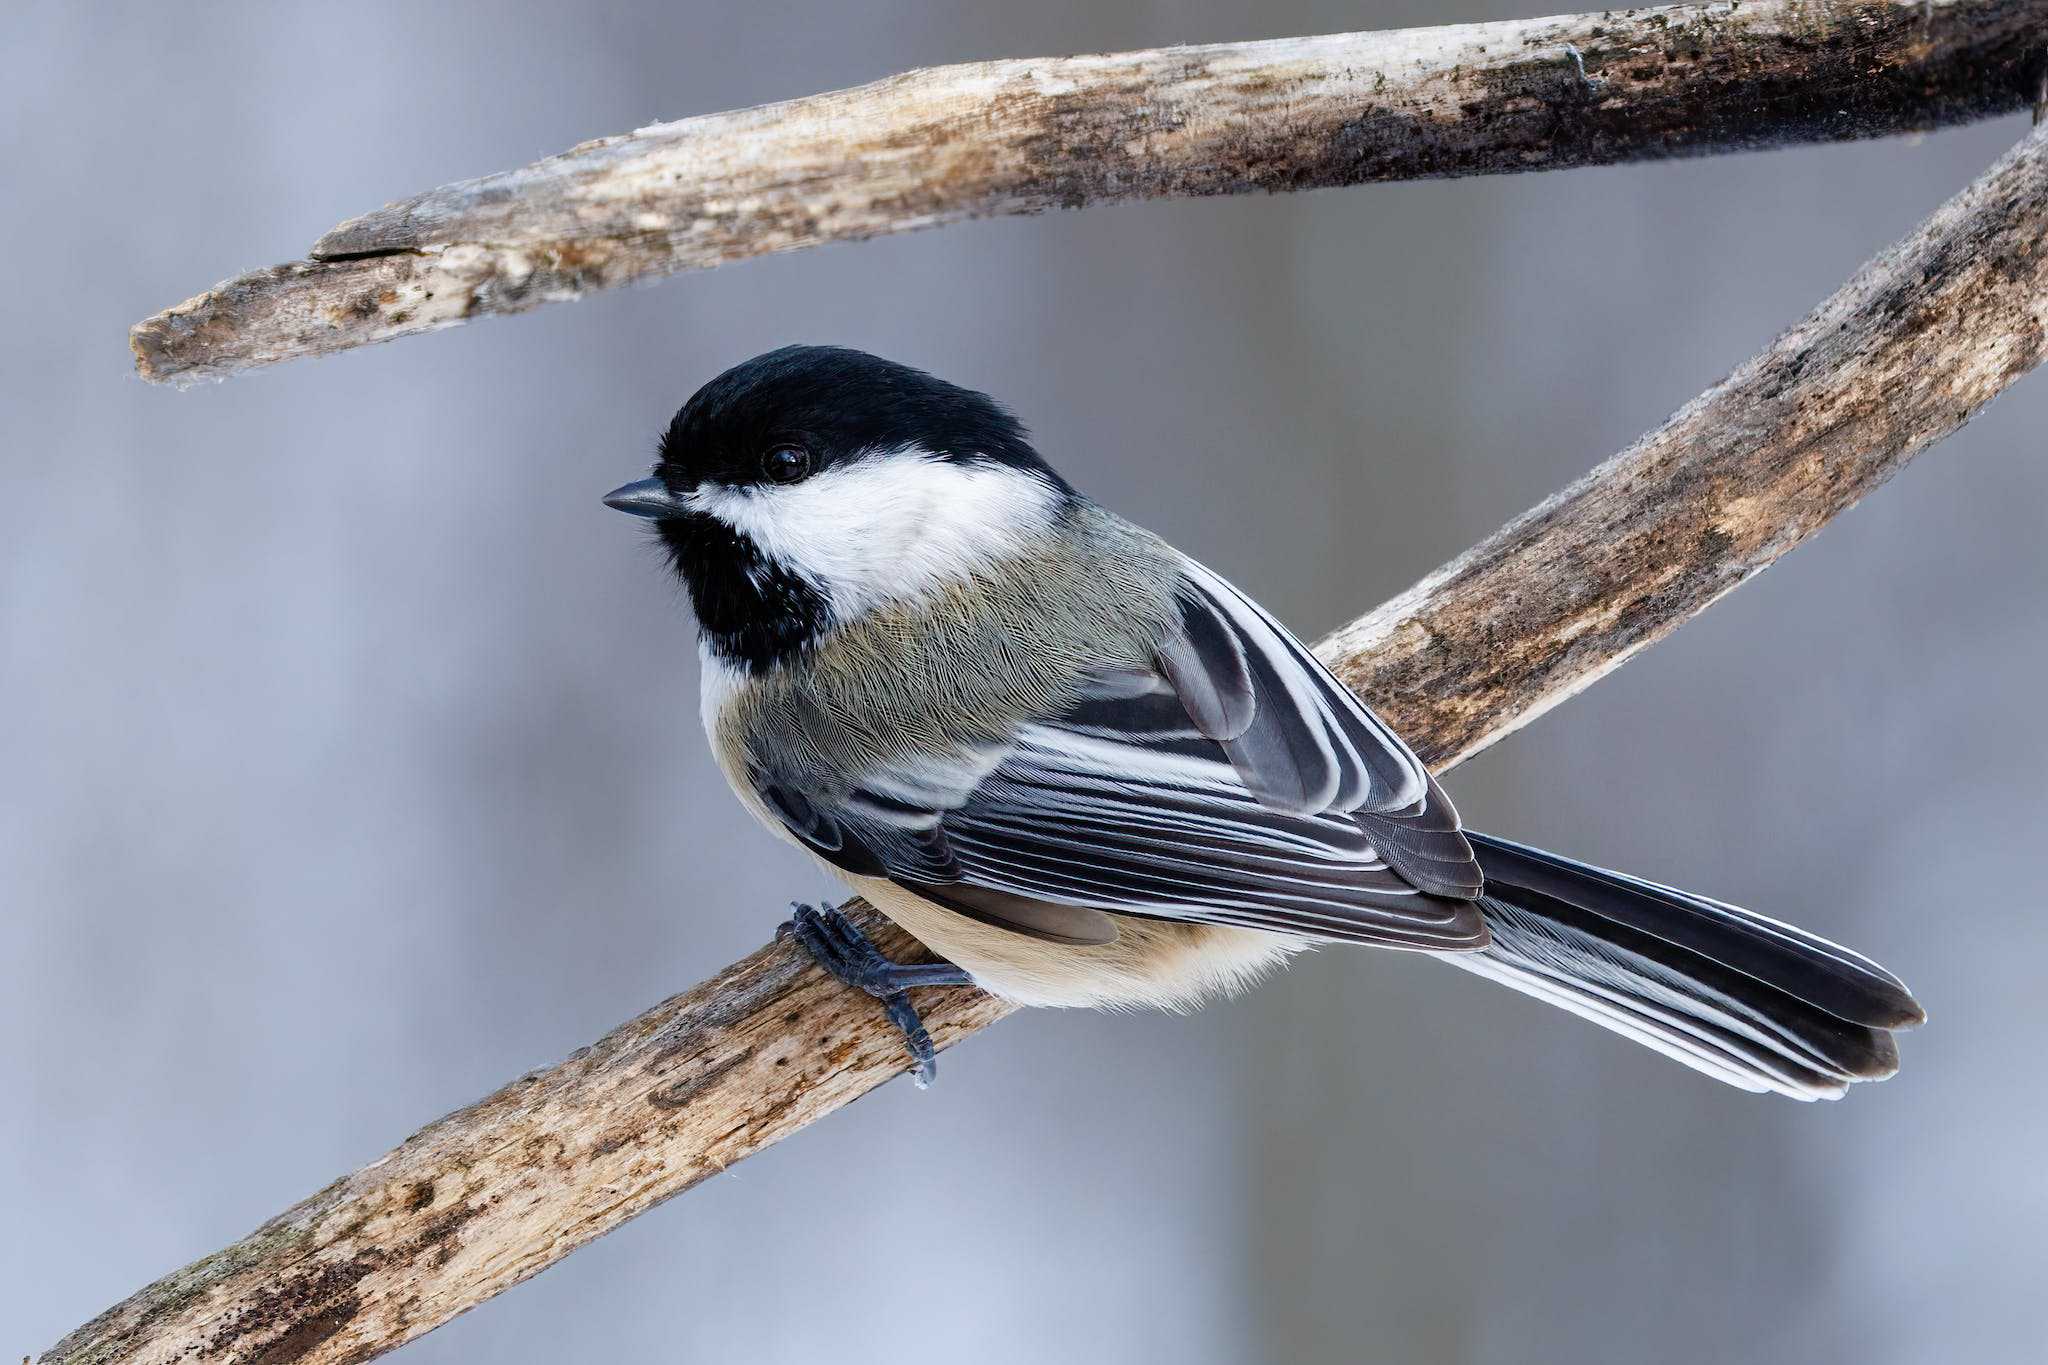 Close-Up of a Black-Capped Chickadee on a Tree Branch